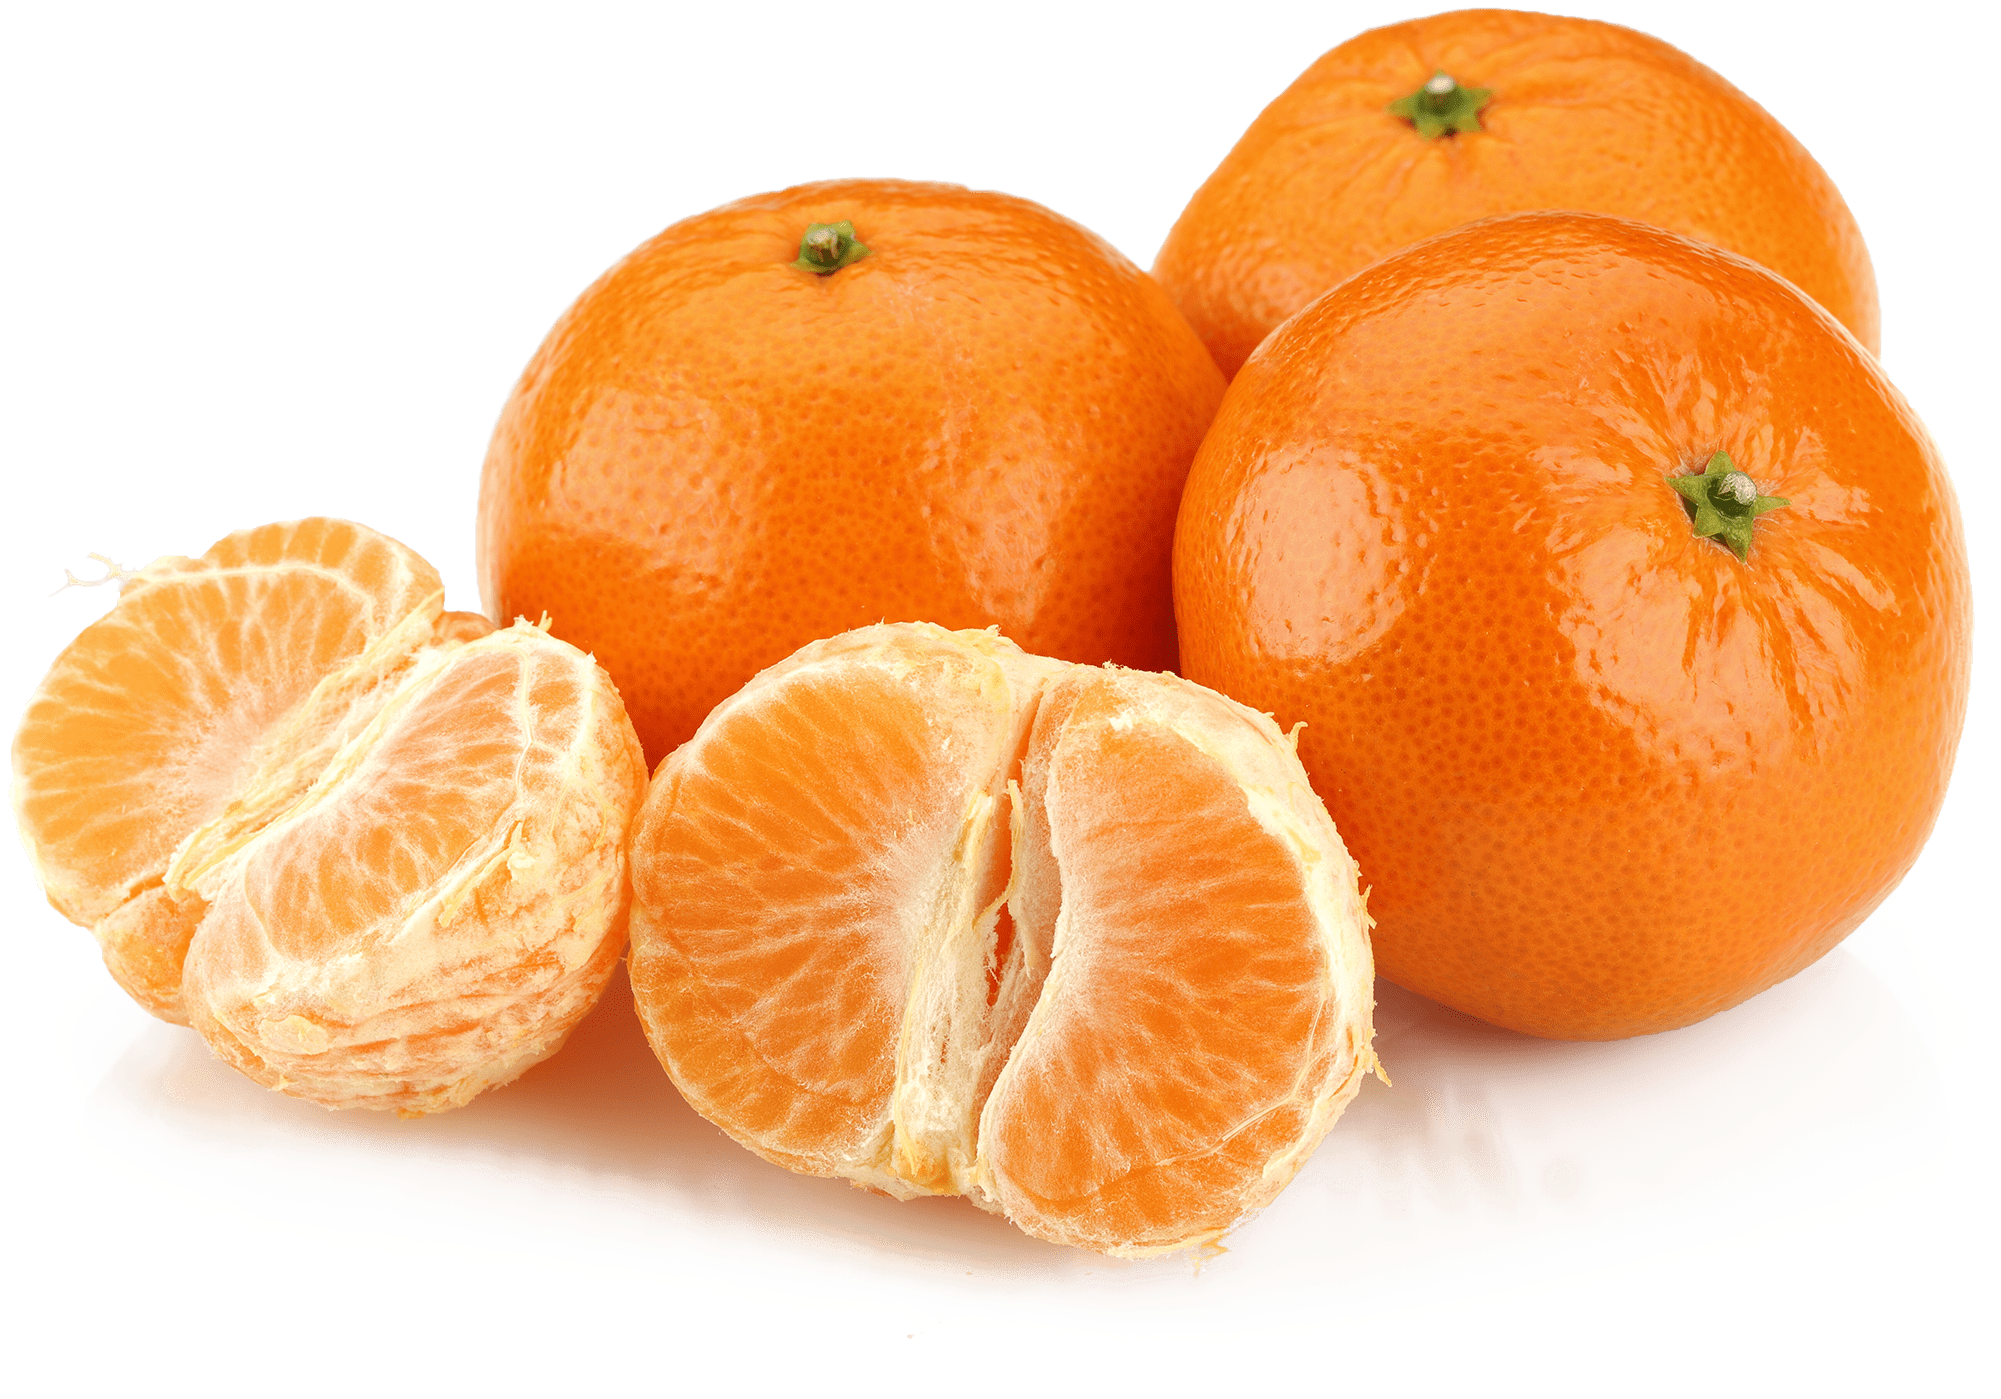 A Group Of Oranges And A Peeled Orange